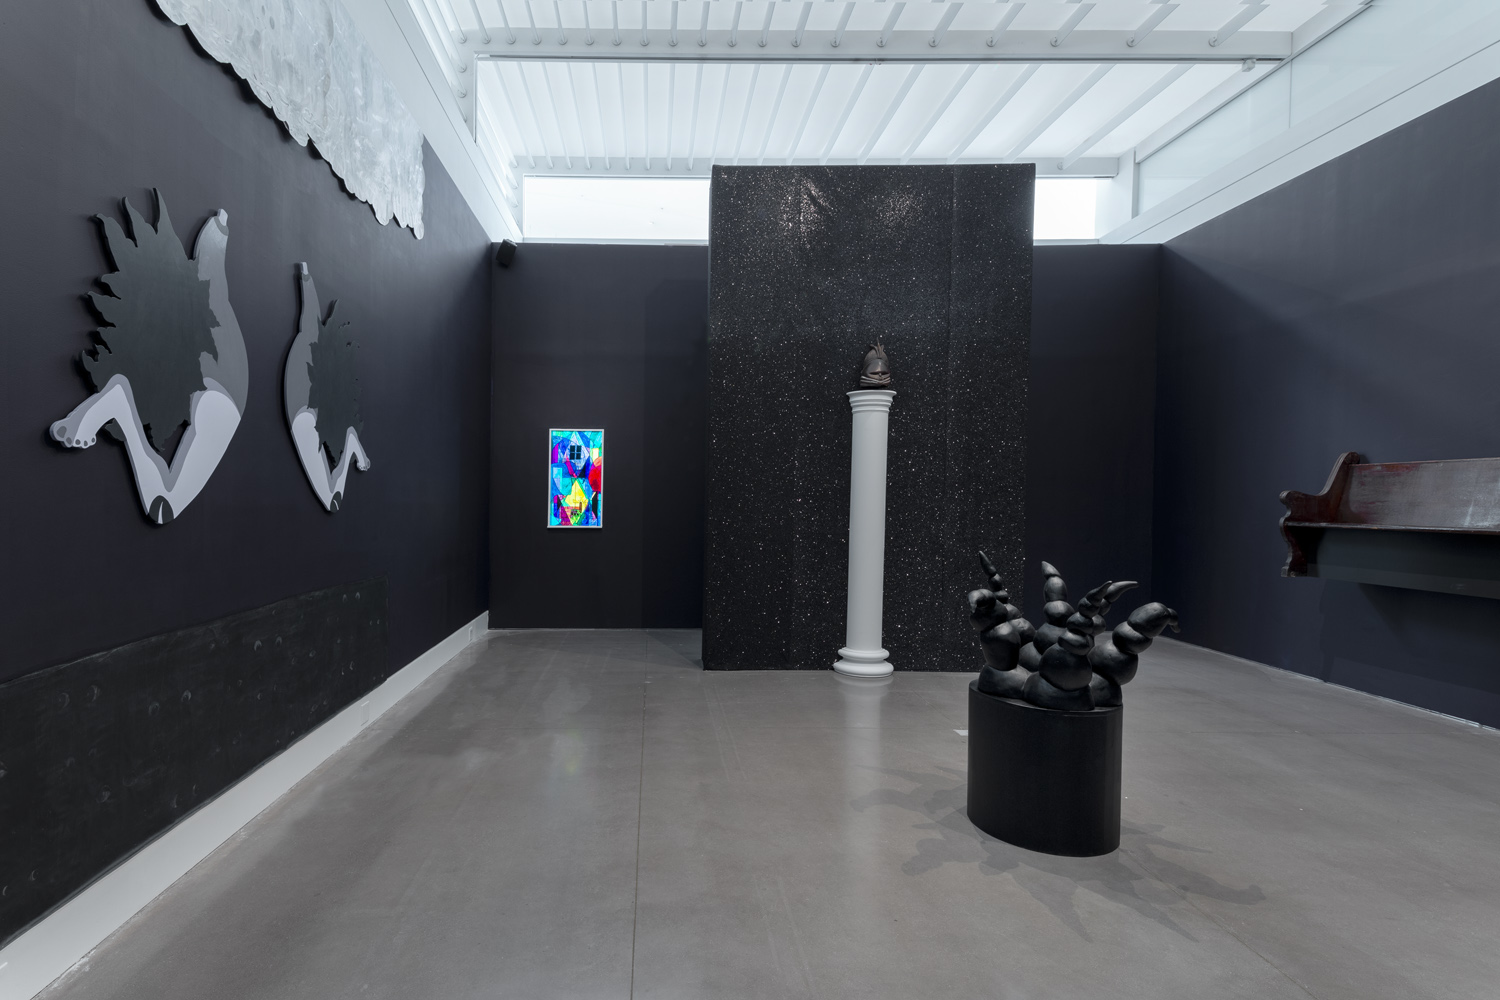 Black walks grey artwork atta ched to wall, colored rectangular artwork on wall, brown wood bench attached to wall, white column with hanging artwork behind it and black art piece on concrete floor 